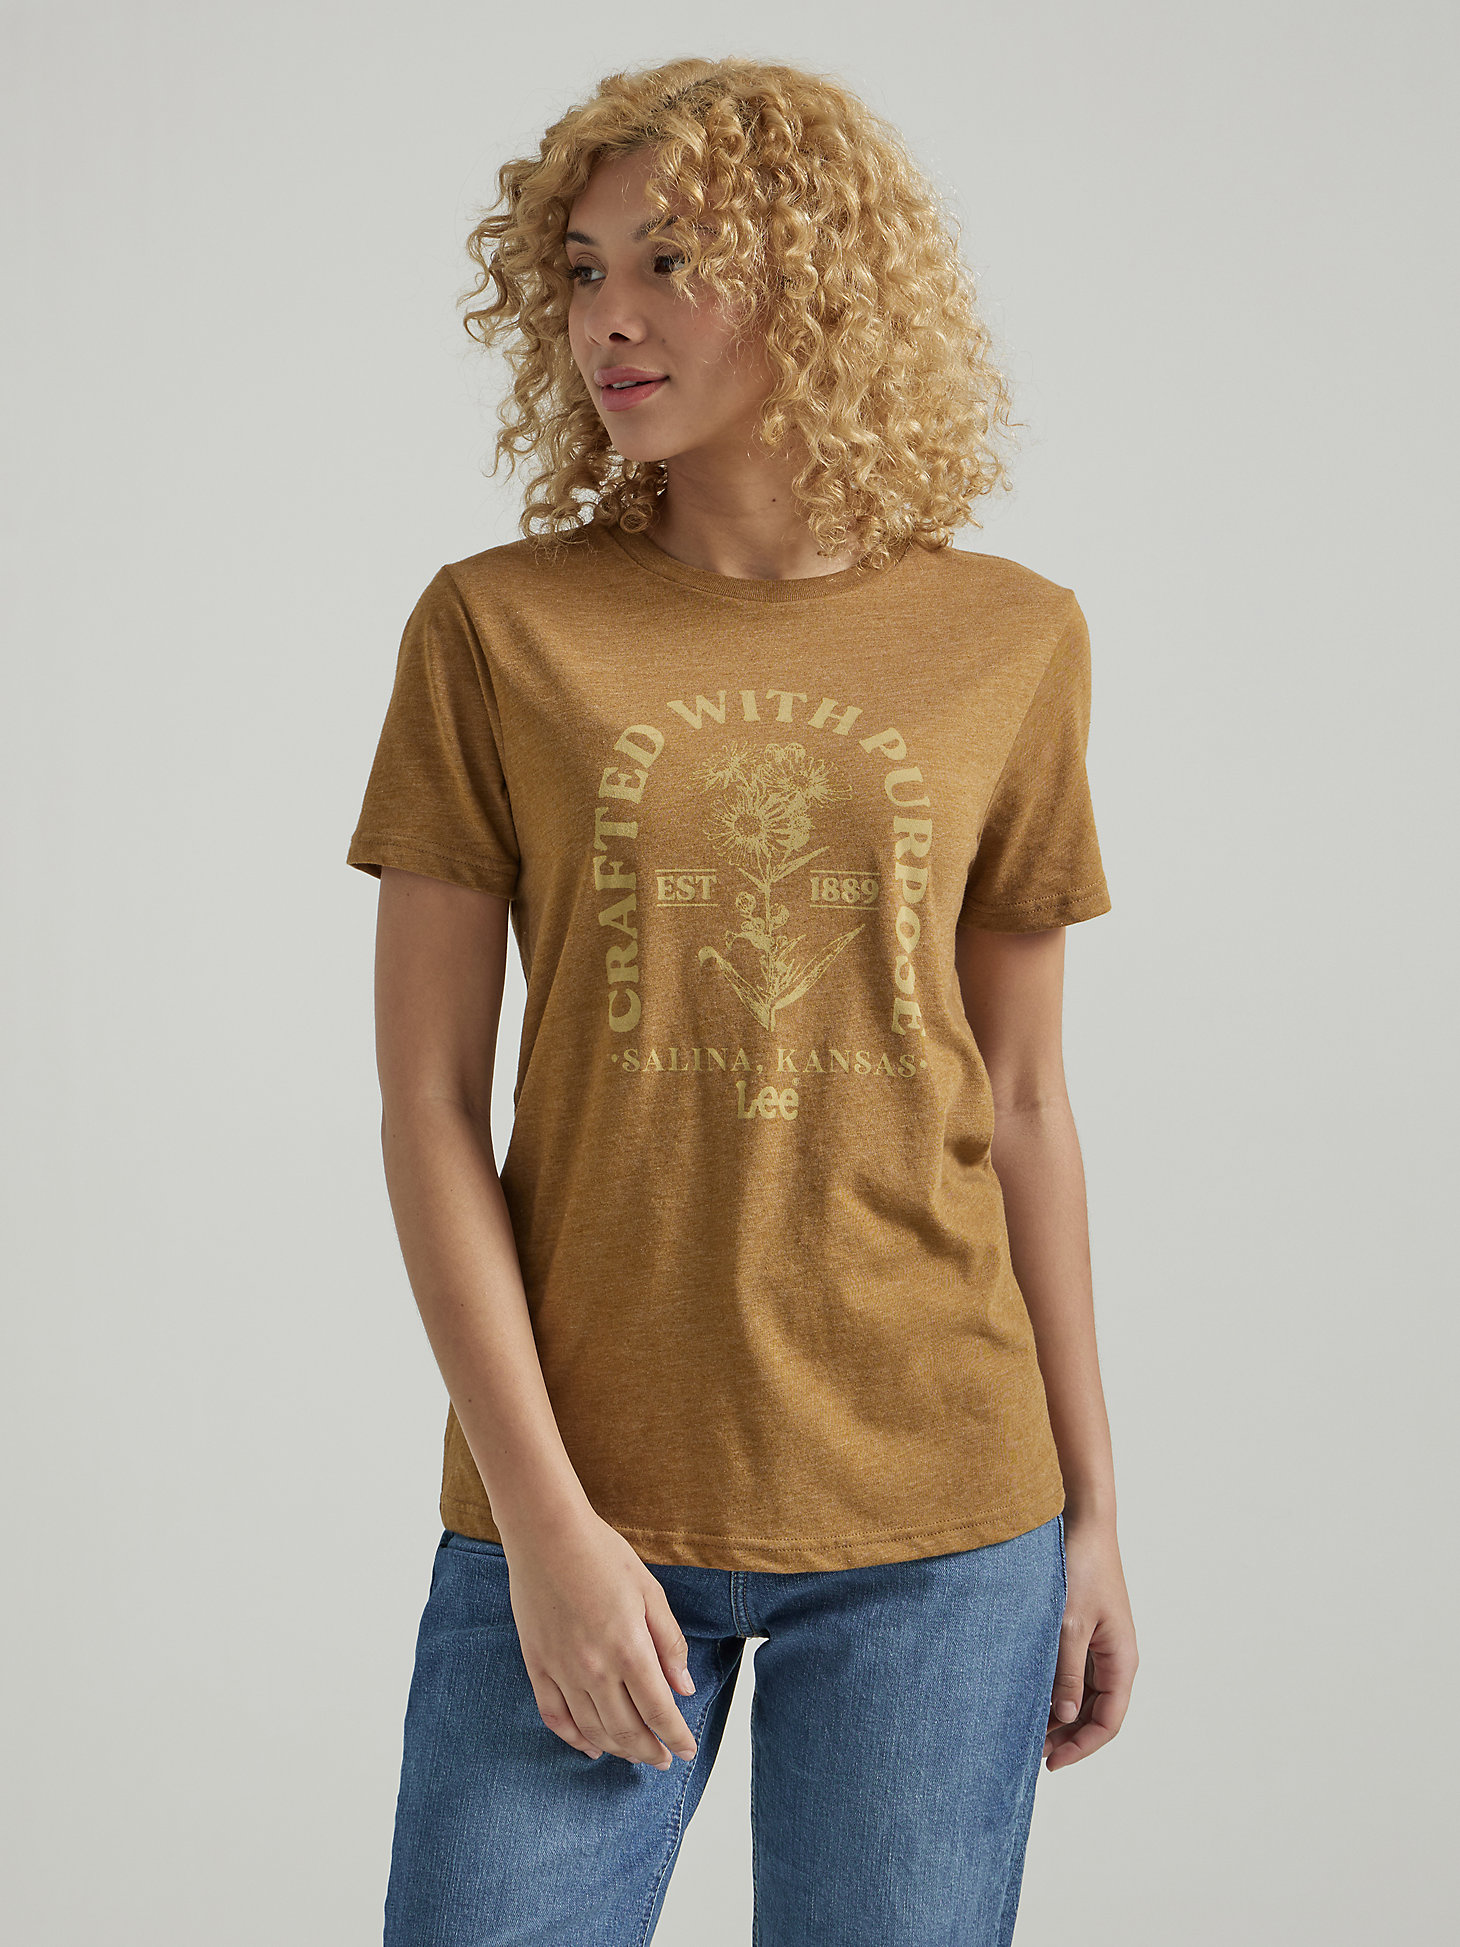 Women's Crafted With Purpose Graphic Tee in Tumbleweed main view